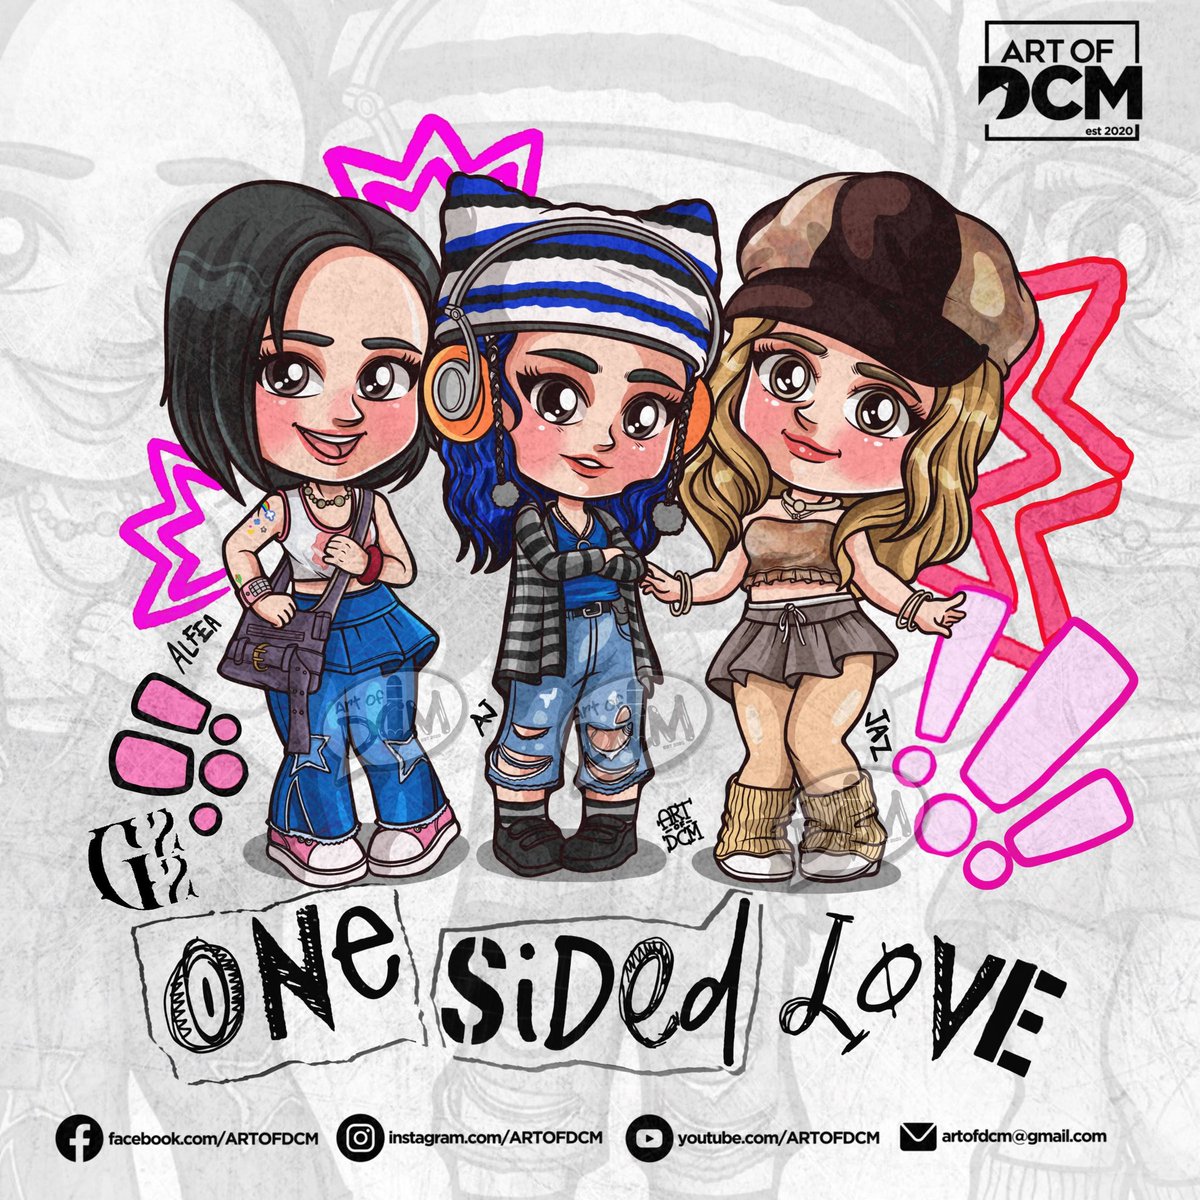 @G22Official CHIBIFIED OSL ❤️
My LSS for the past few days itong One Sided Love 😍
Congrats also for all the recognitions they're getting from their Show It All performances 🙌
#G22 #G22_OneSidedLove
#CornerstoneArtist
#ShowItAll #G22atSHOWITALL 
#ppopchibi #PPopRise #ppop